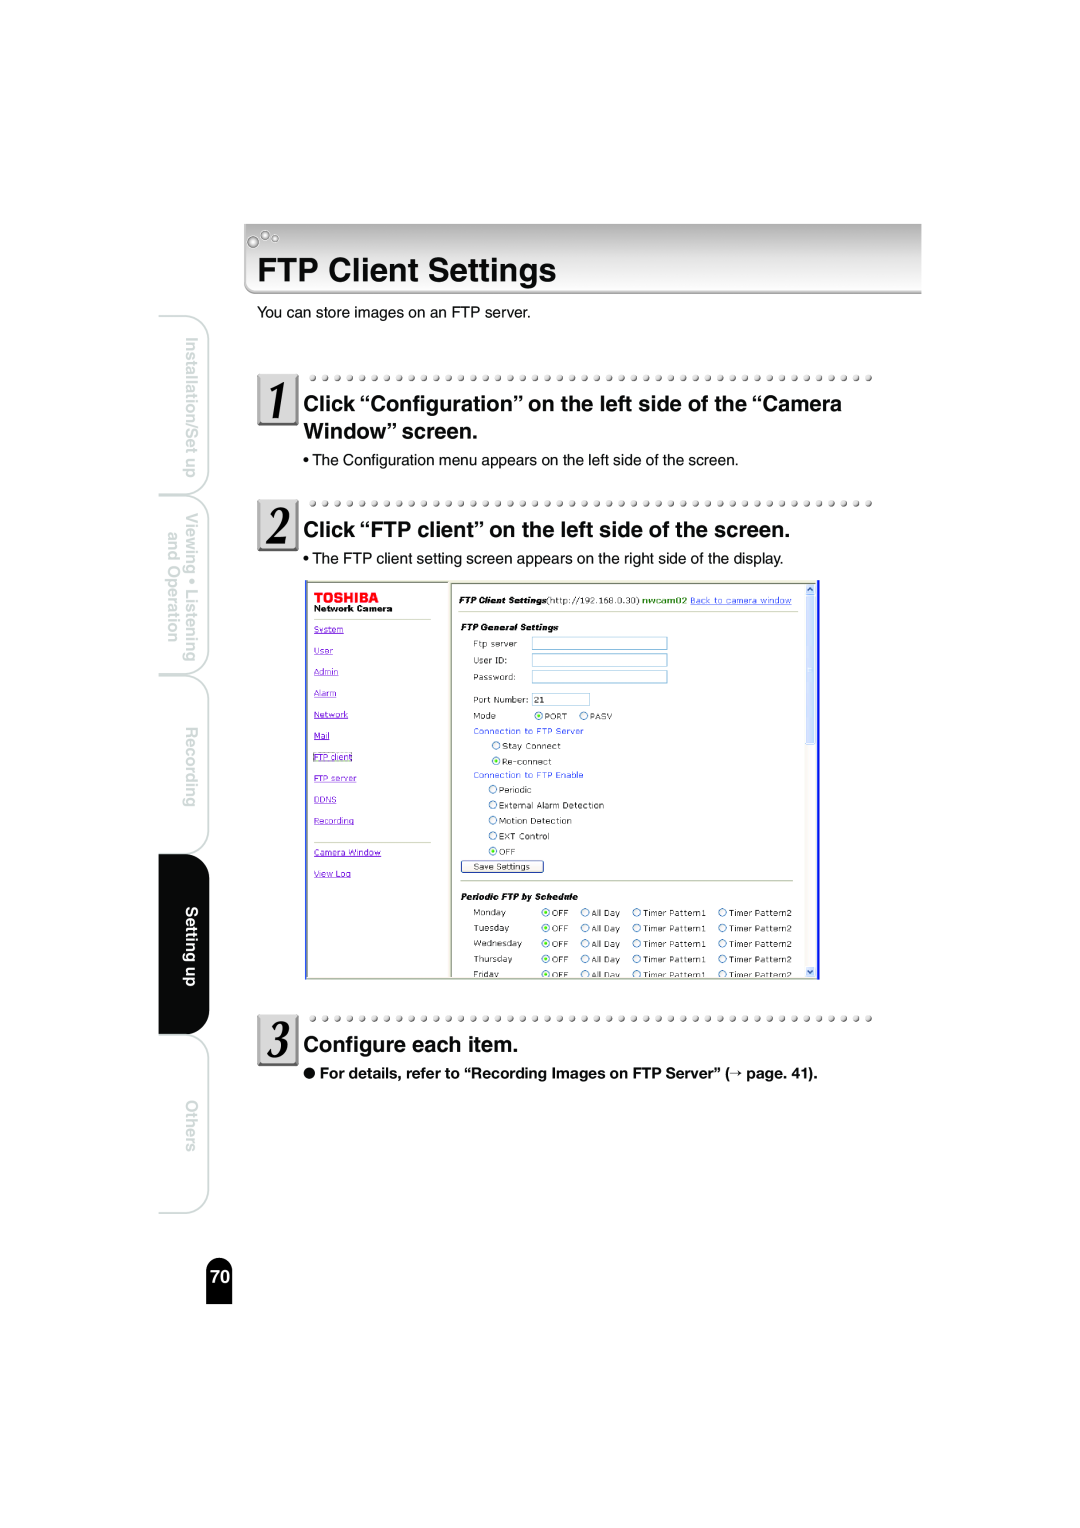 Toshiba IK-WB02A FTP Client Settings, Click “FTP client” on the left side of the screen, Configure each item, Recording 